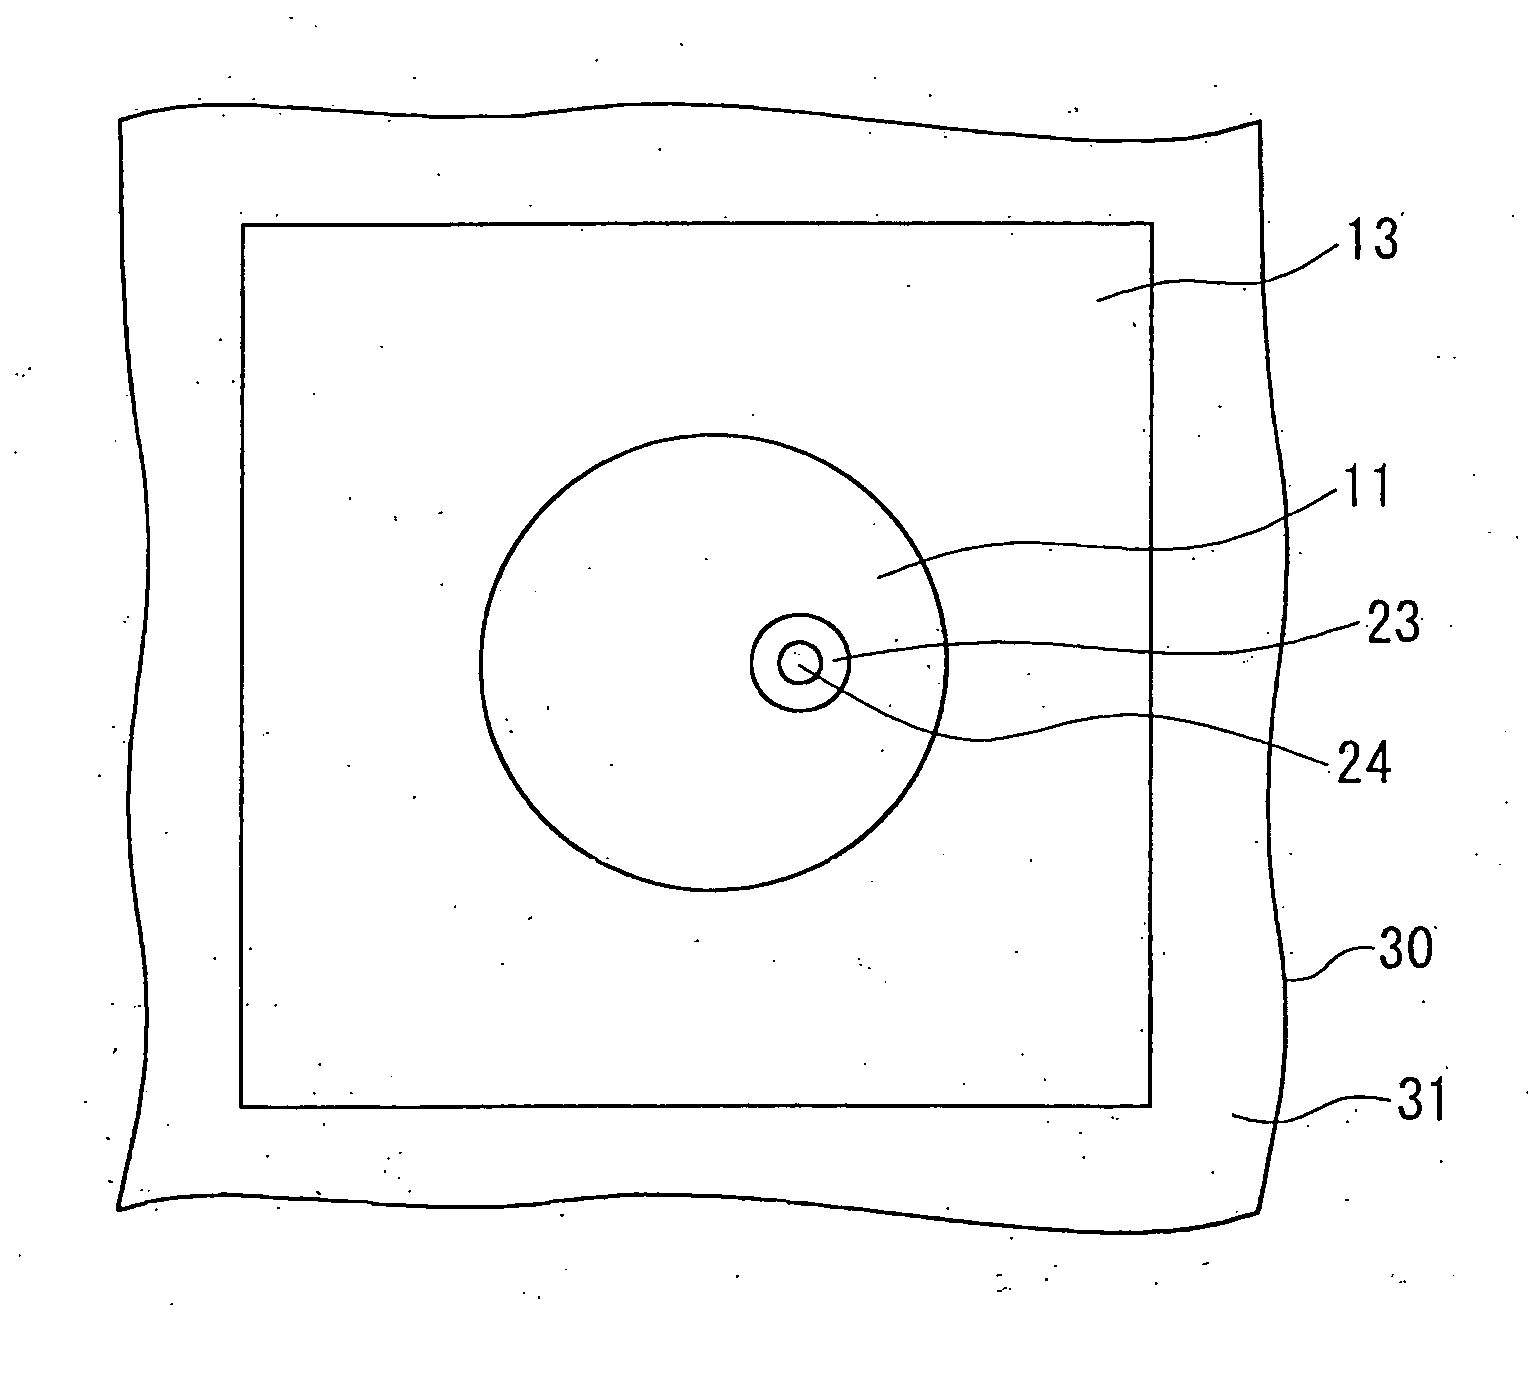 Microstrip Antenna and Clothed Attached with the Same